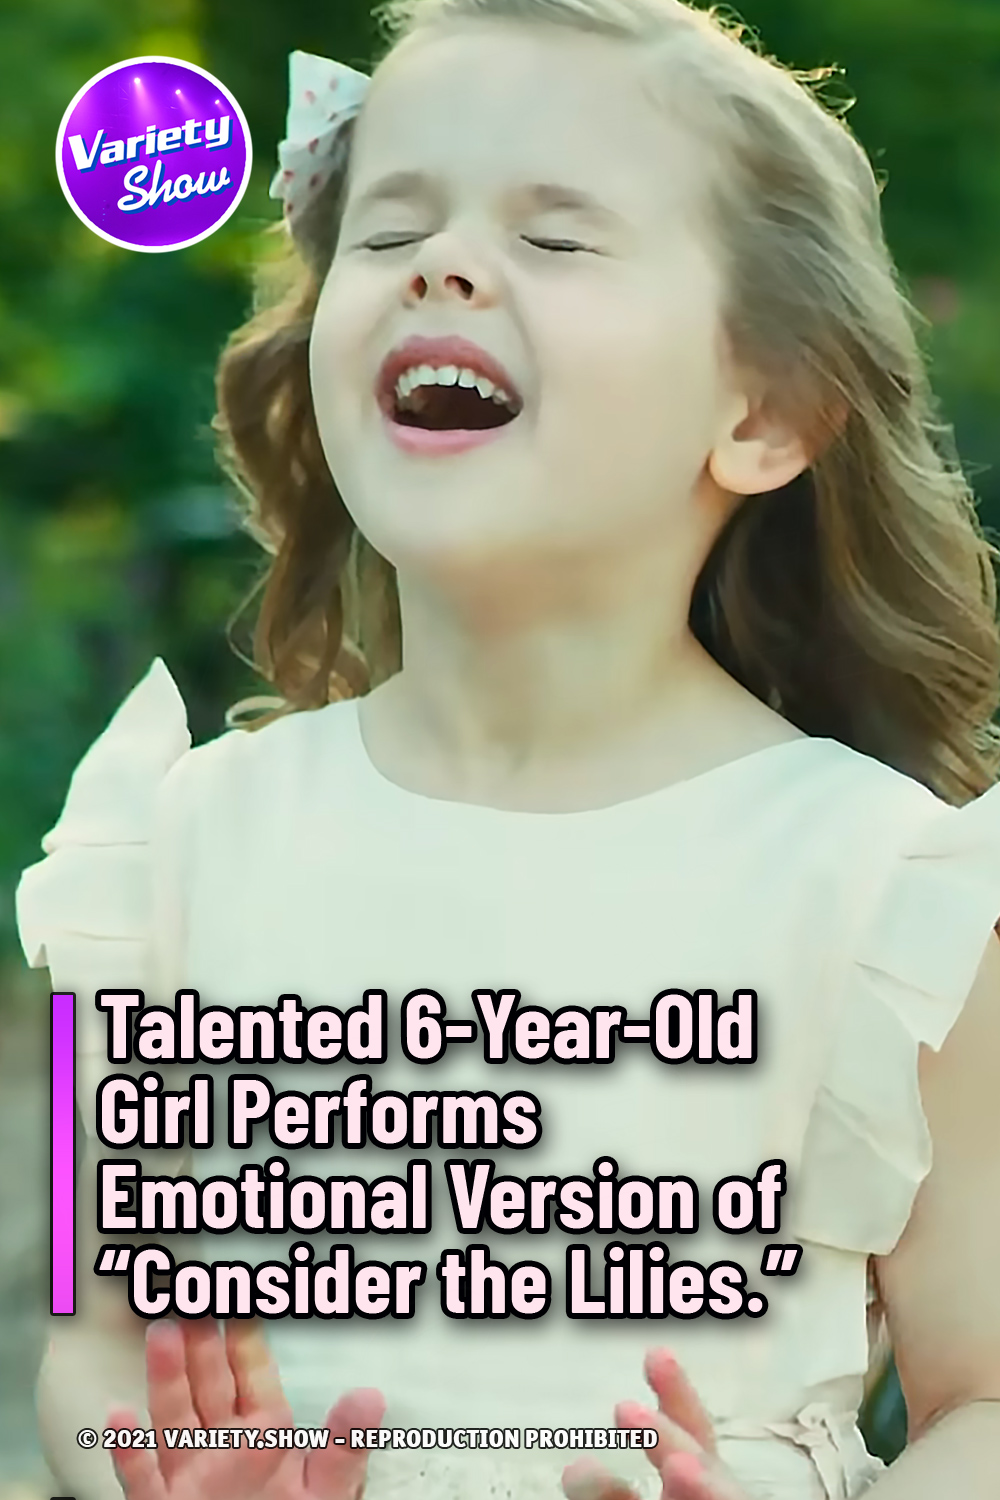 Talented 6-Year-Old Girl Performs Emotional Version of “Consider the Lilies.”